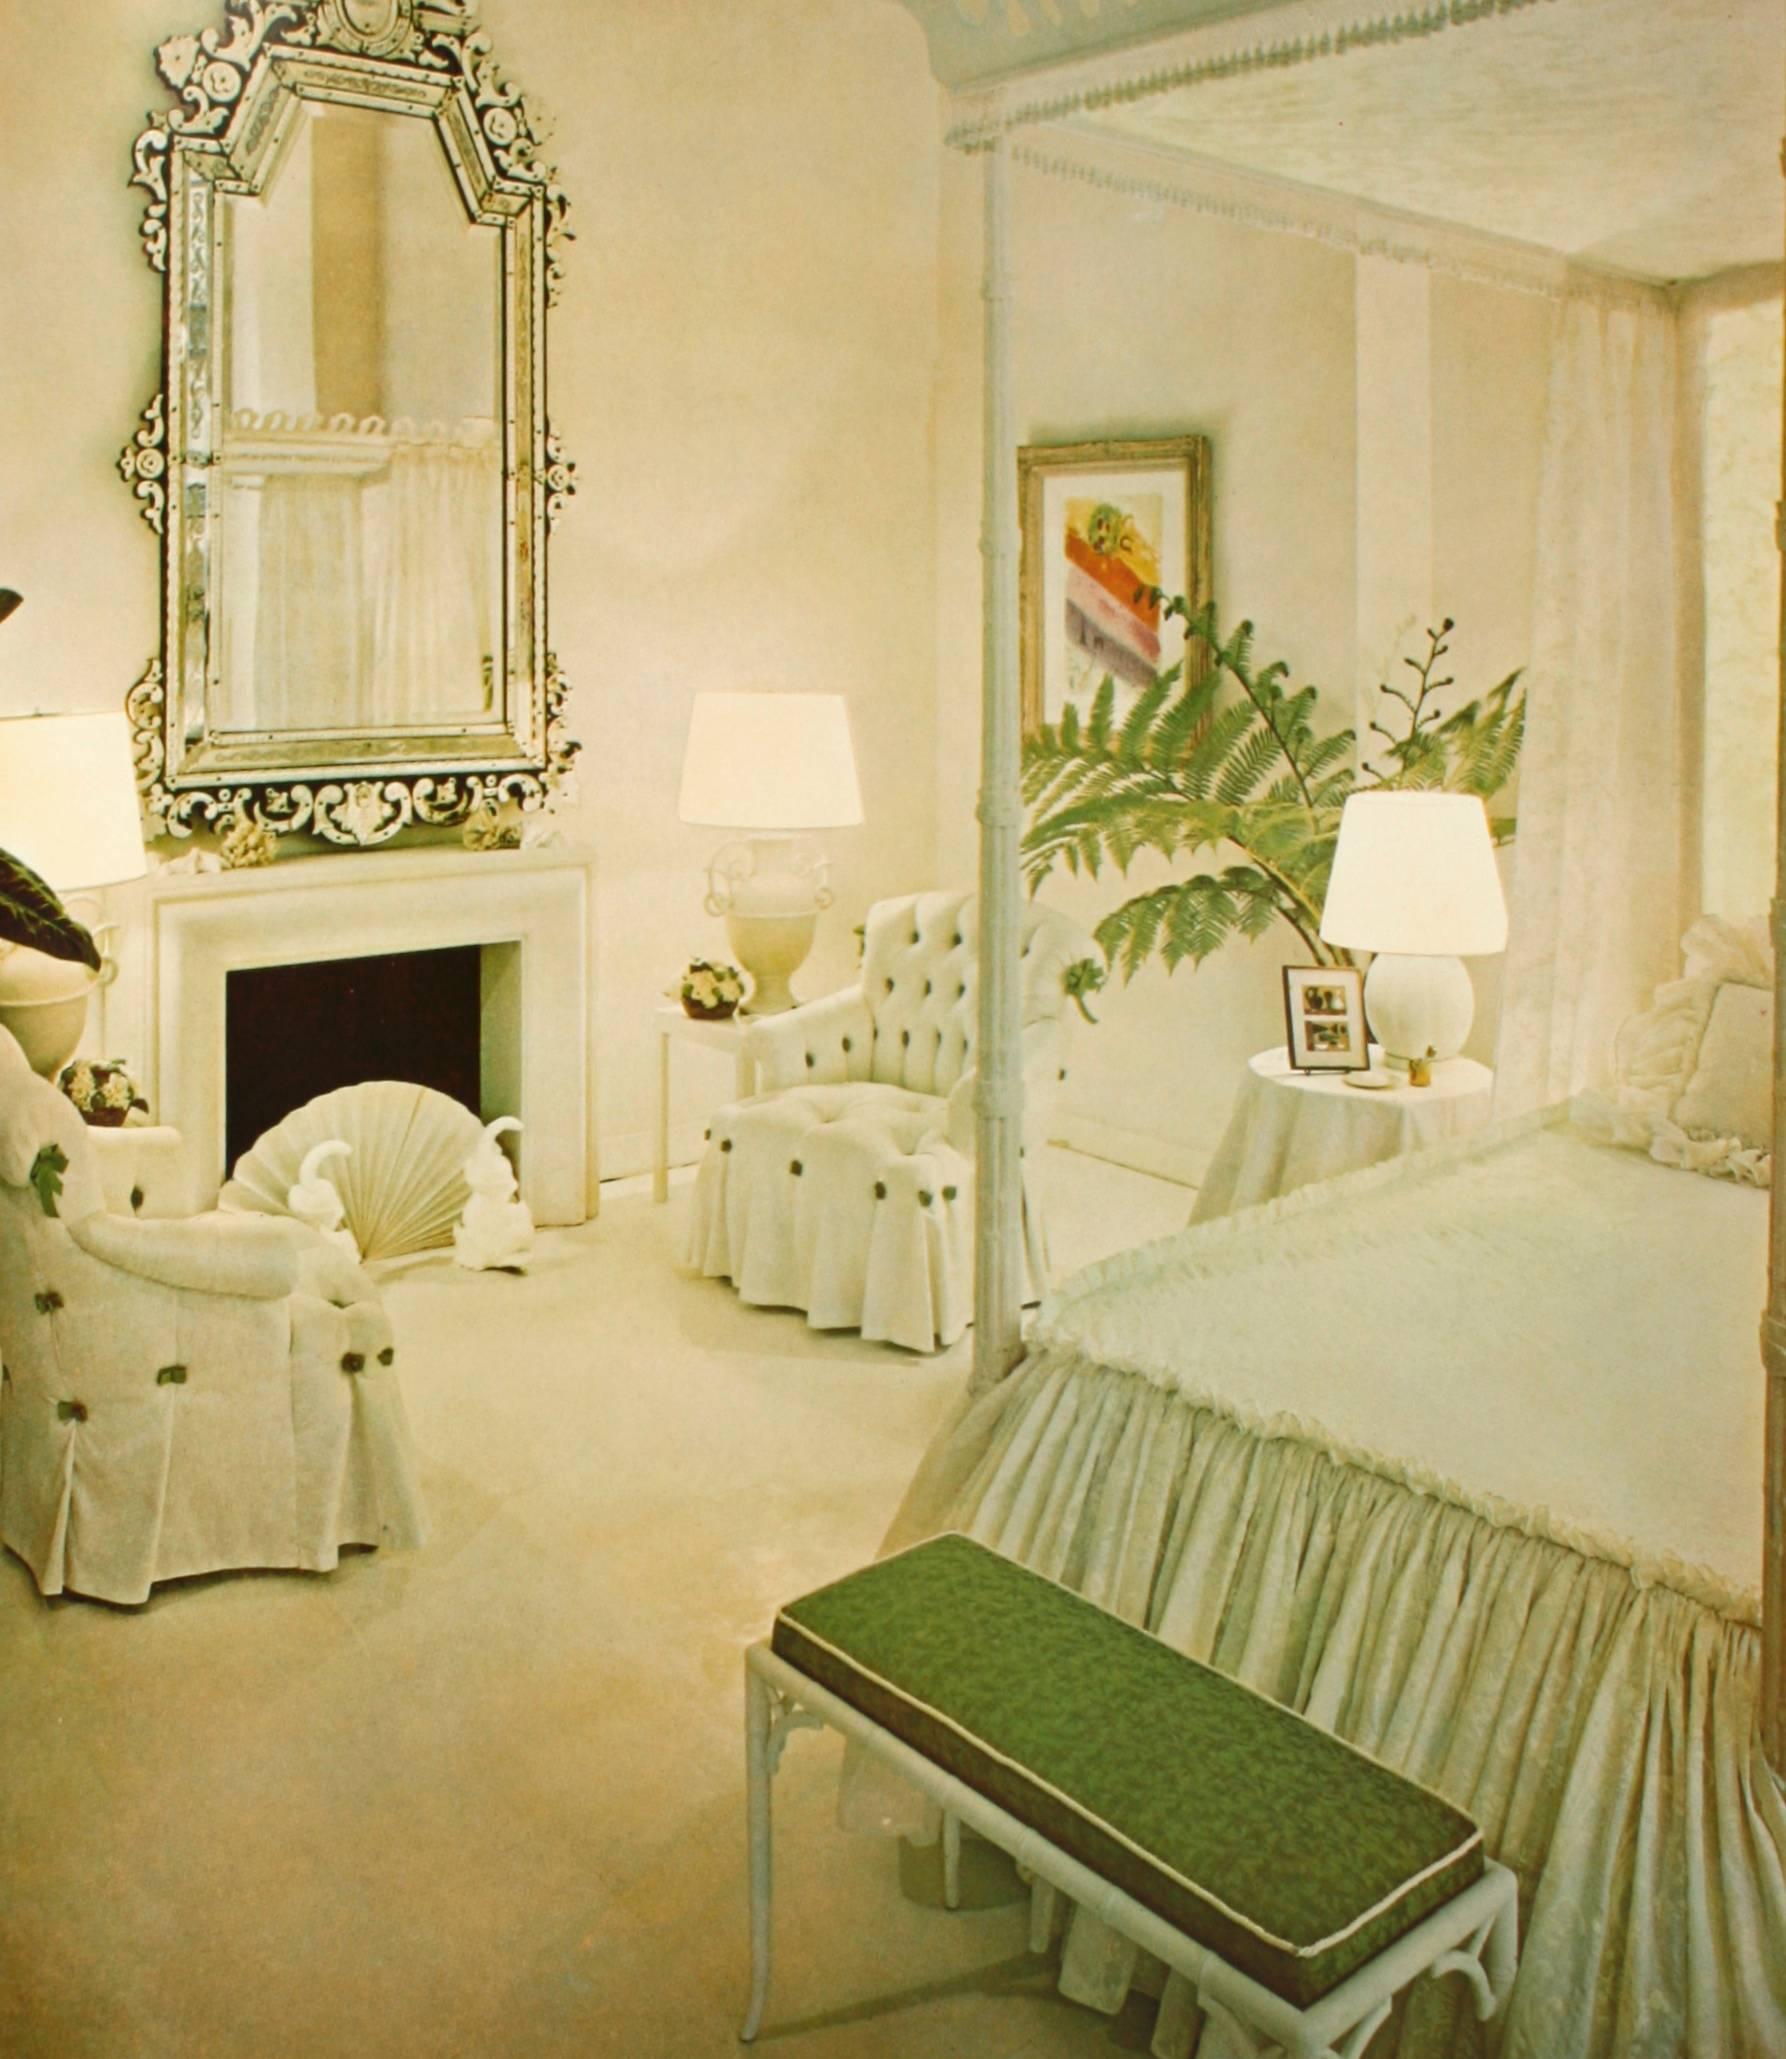 Finest Rooms by America's Great Decorators by Katharine Tweed 3